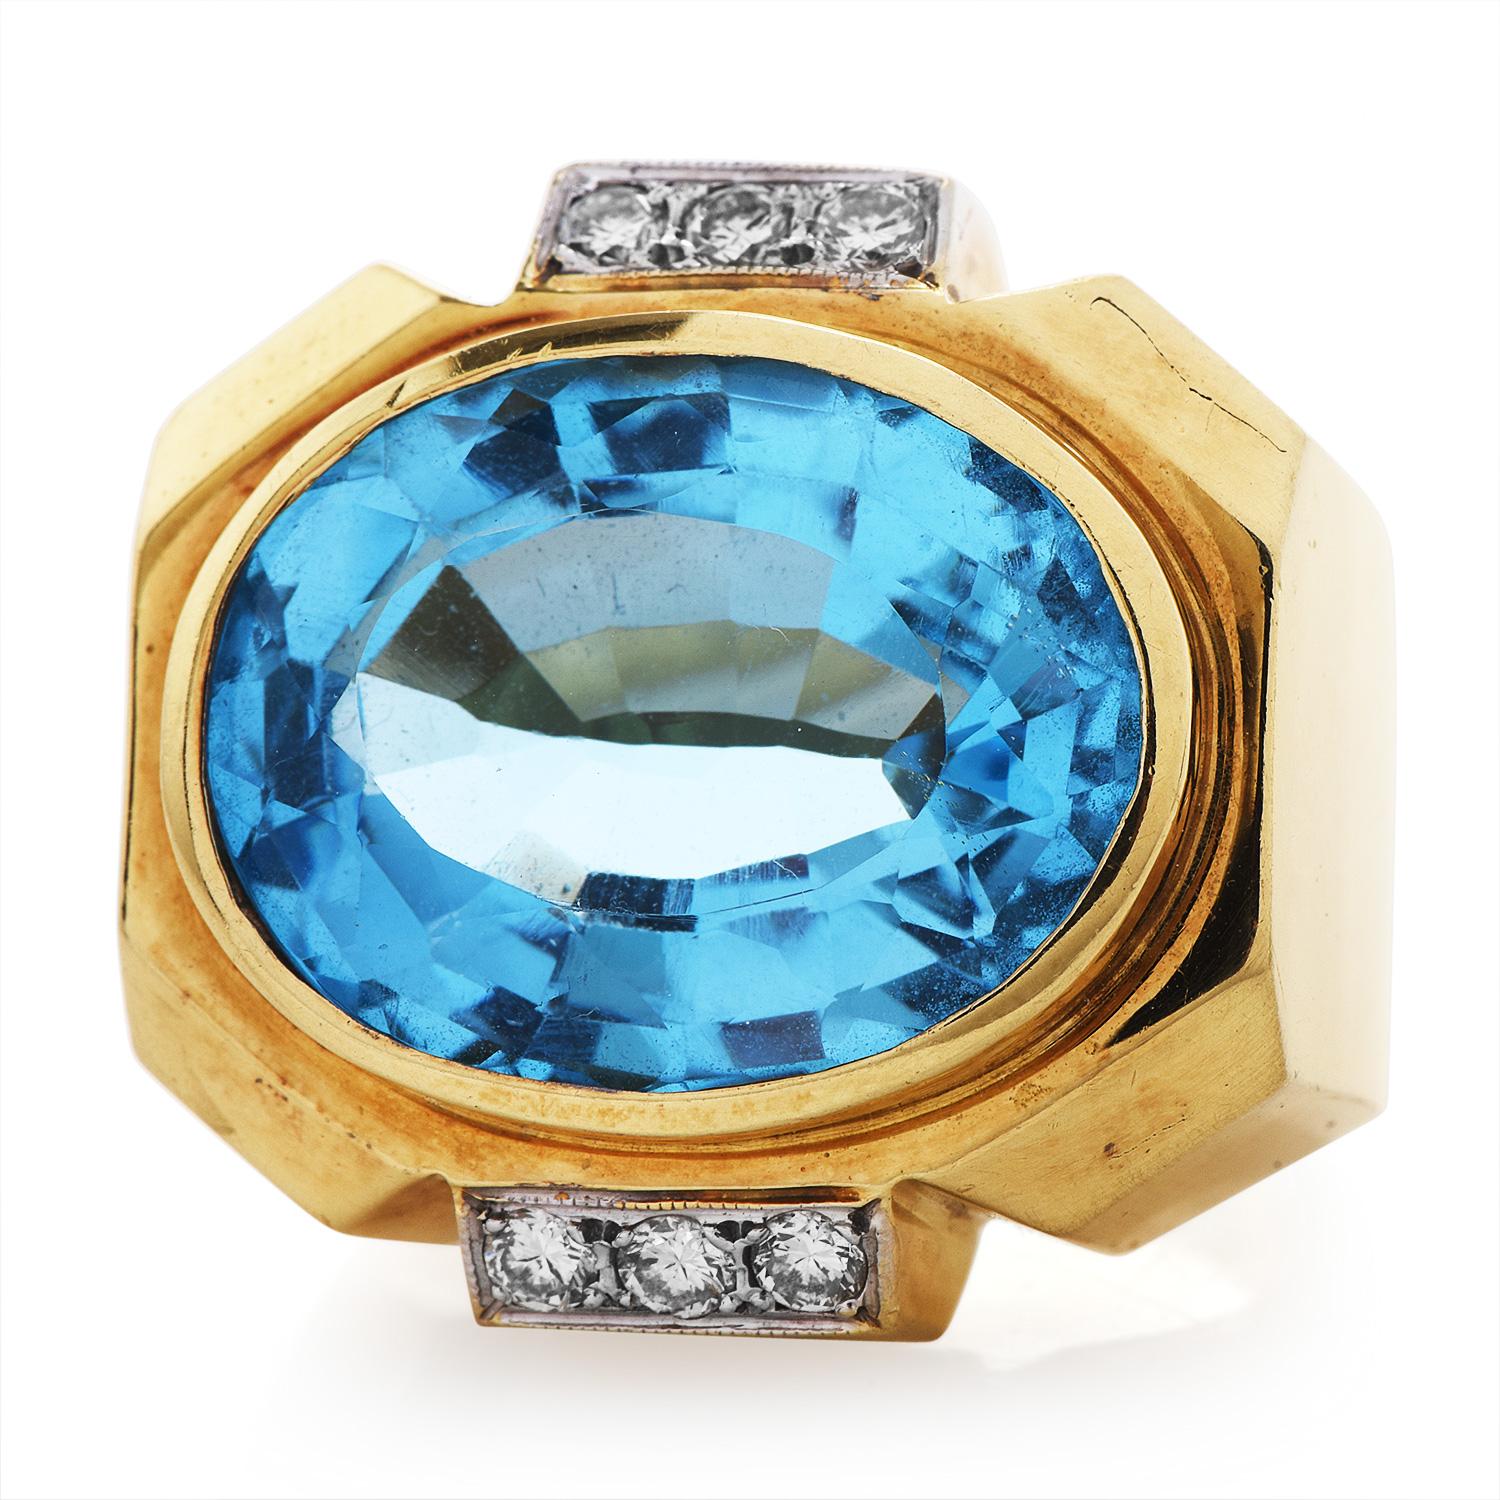 A retro and geometric piece with style and bold looks.

This 1980s cocktail ring was finely crafted in solid 14K Yellow Gold.

This exquisite piece has a Blue Topaz in the center, measuring 20.25 mm x 15.30 mm x 8.97 mm

Adorning the piece are